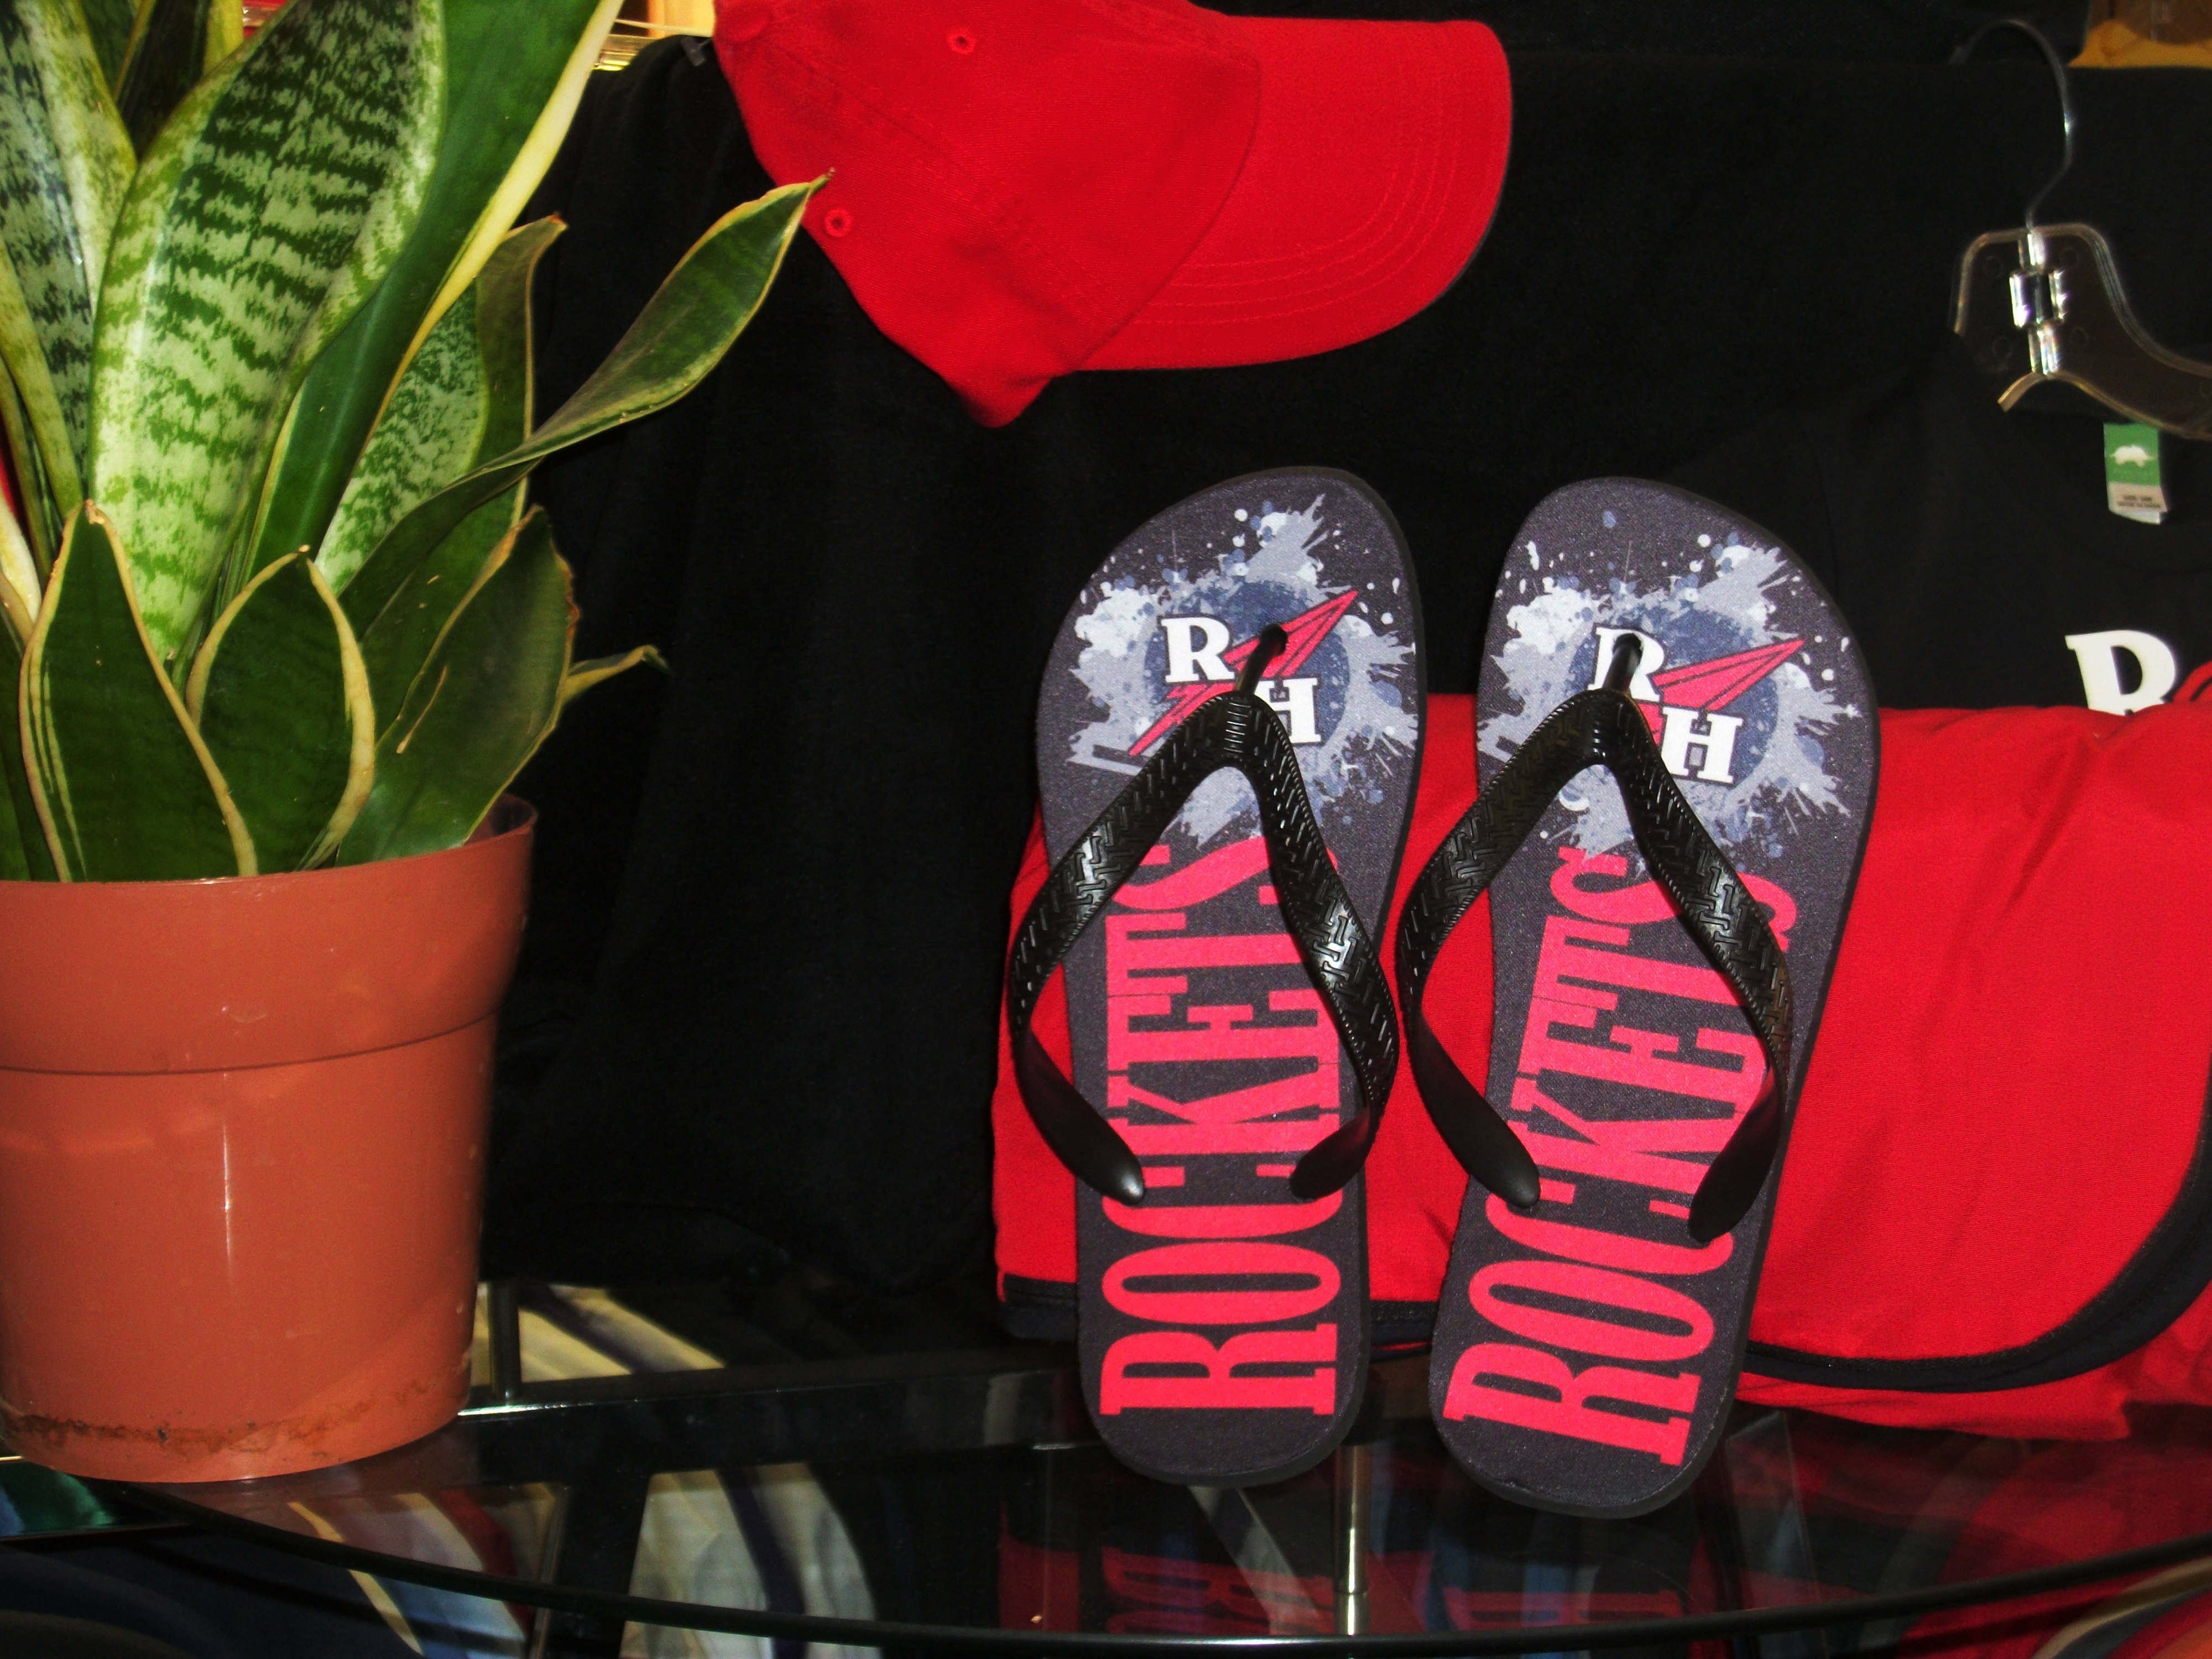 Flops made with sublimation printing